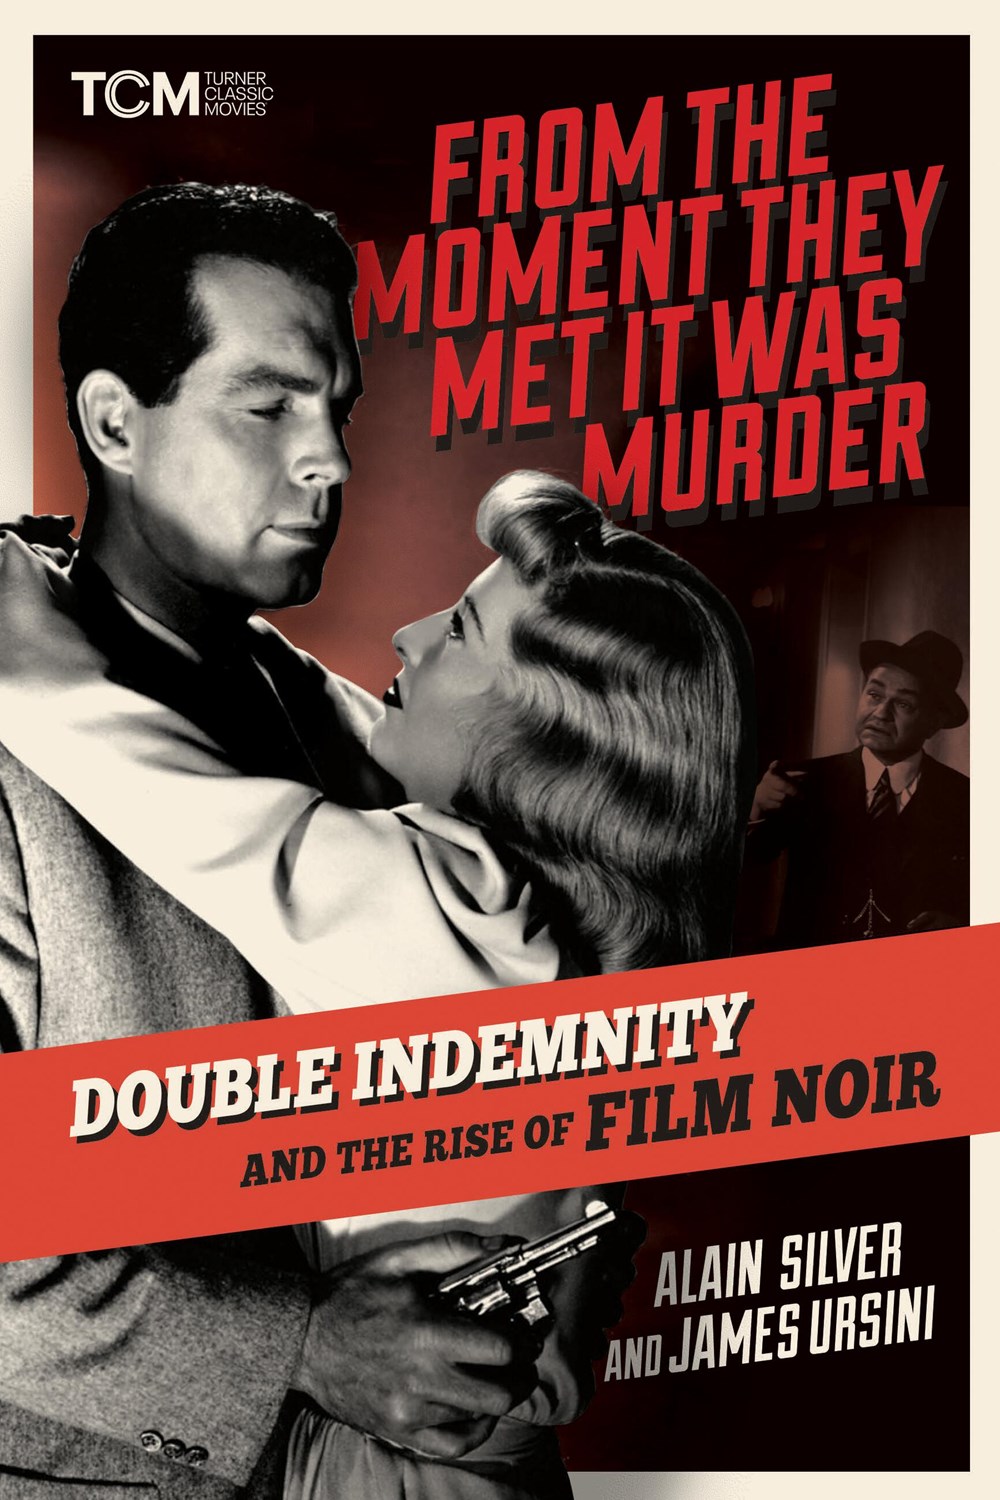 From the Moment They Met It Was Murder: ‘Double Indemnity’ and the Rise of Film Noir